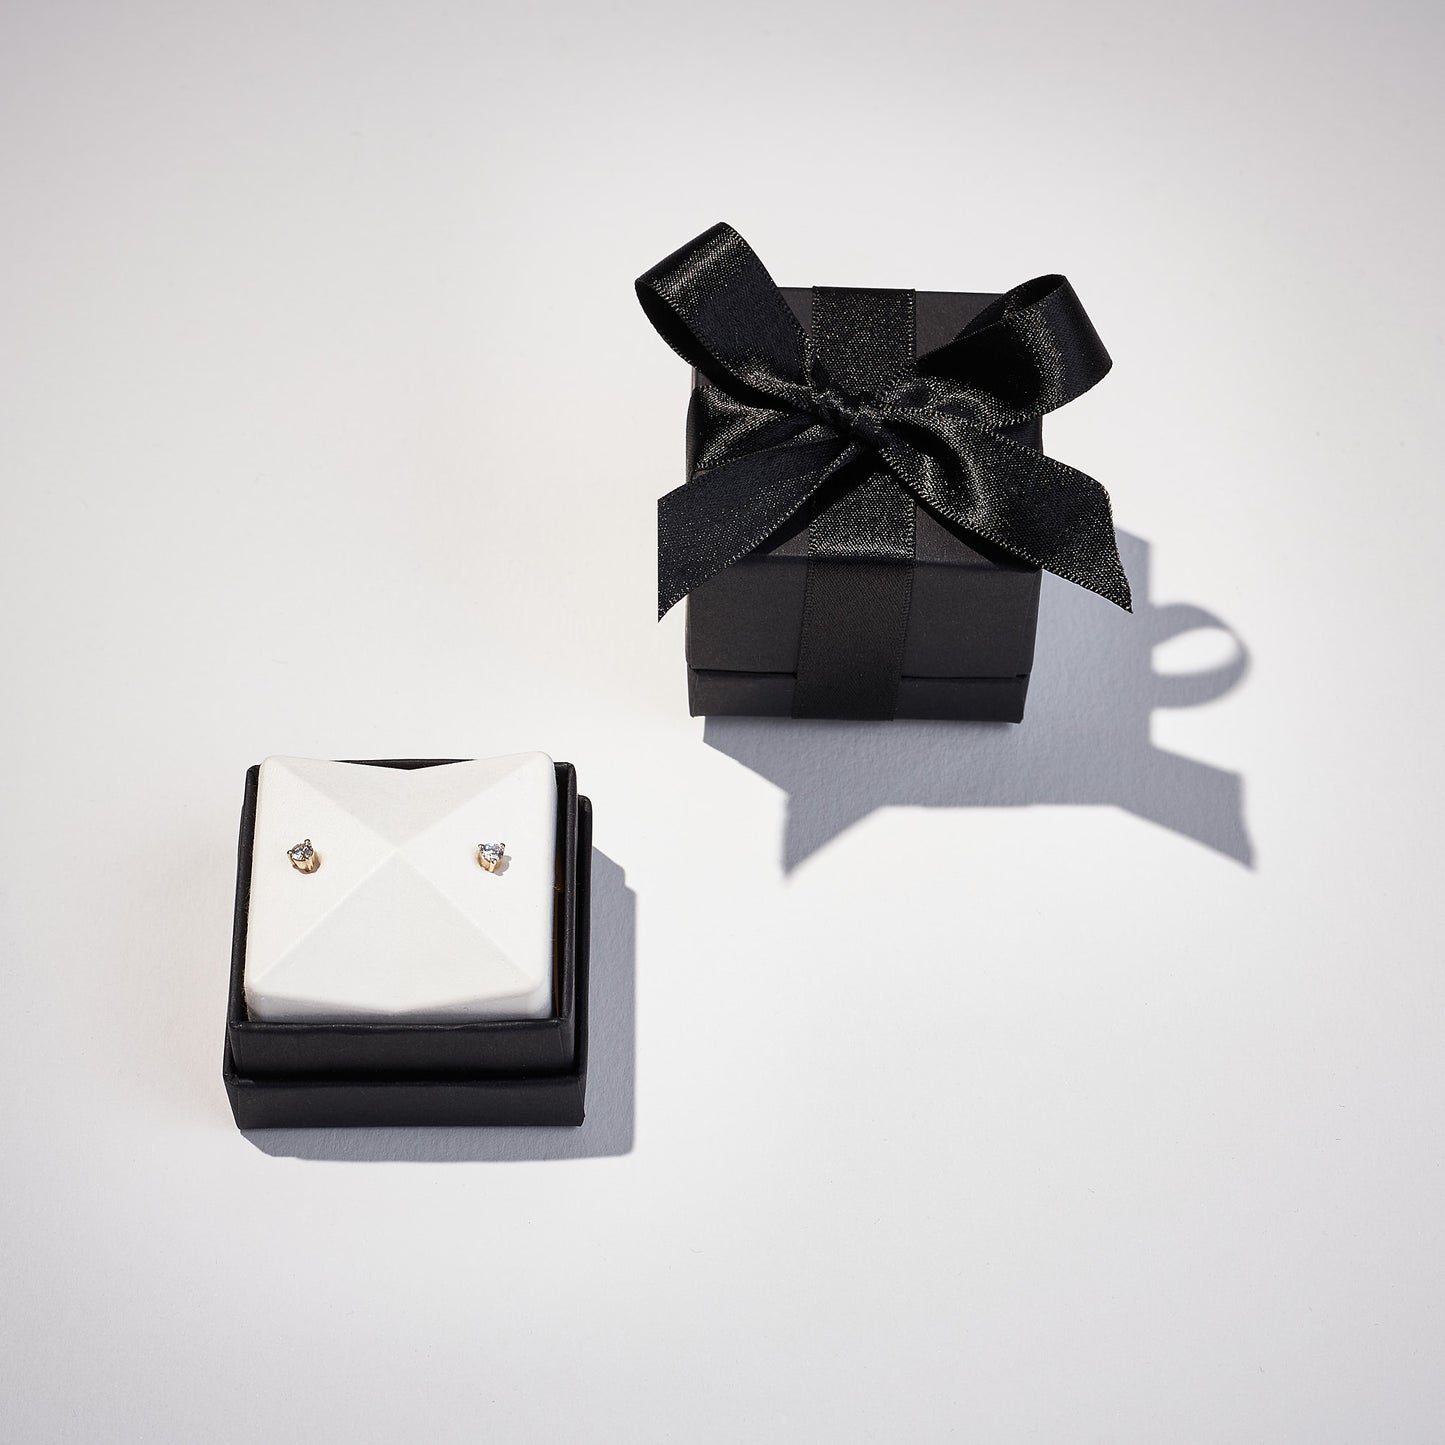 Modern 1/3rd ct Pair Studs in 9ct White Gold